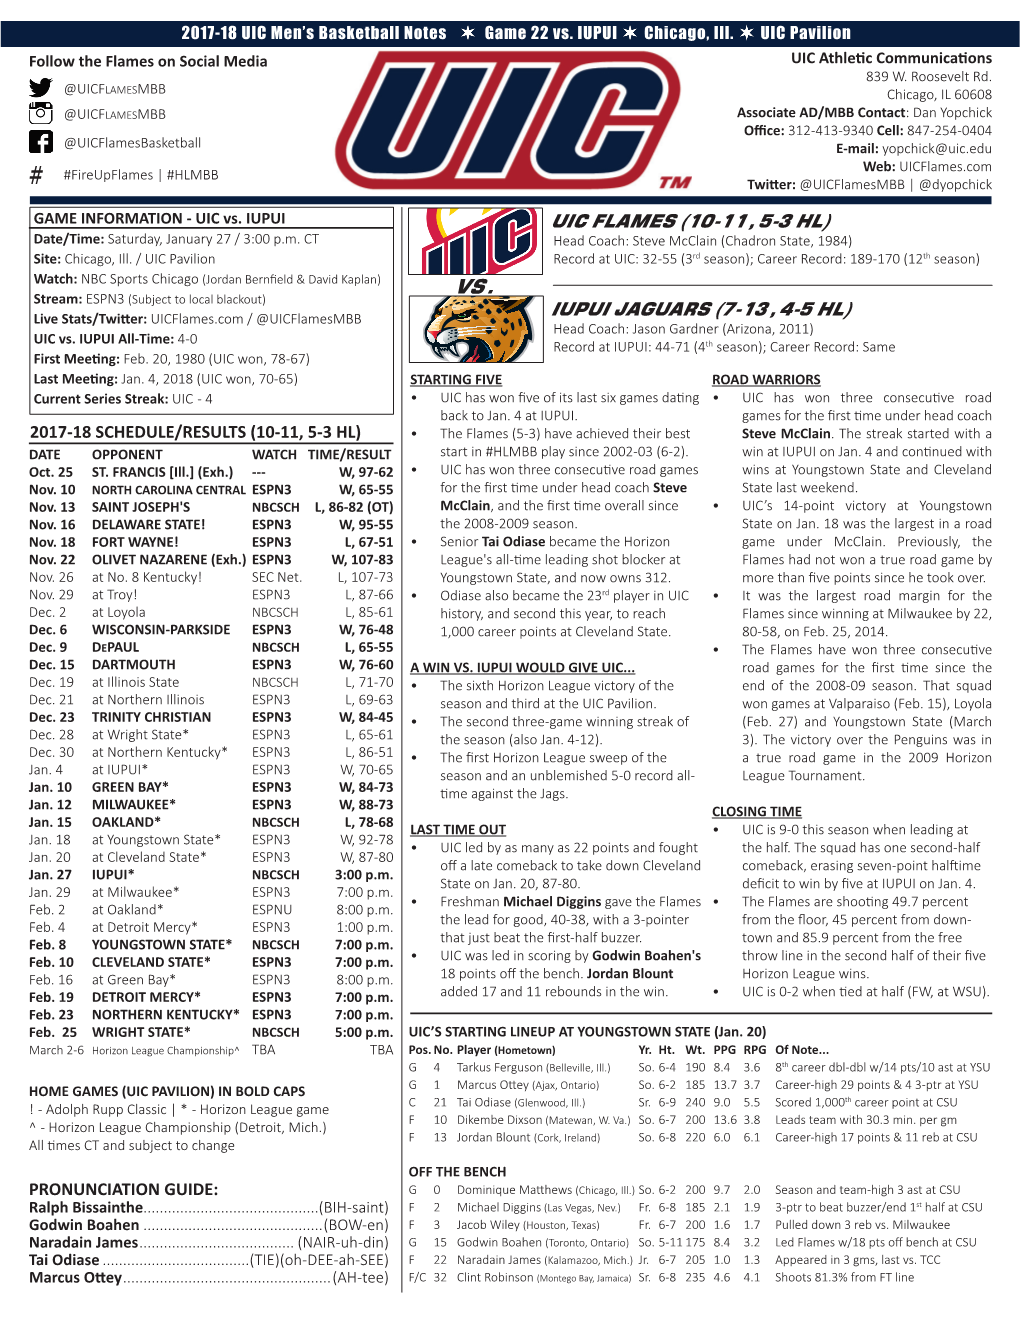 UIC FLAMES (10-11, 5-3 HL) Date/Time: Saturday, January 27 / 3:00 P.M